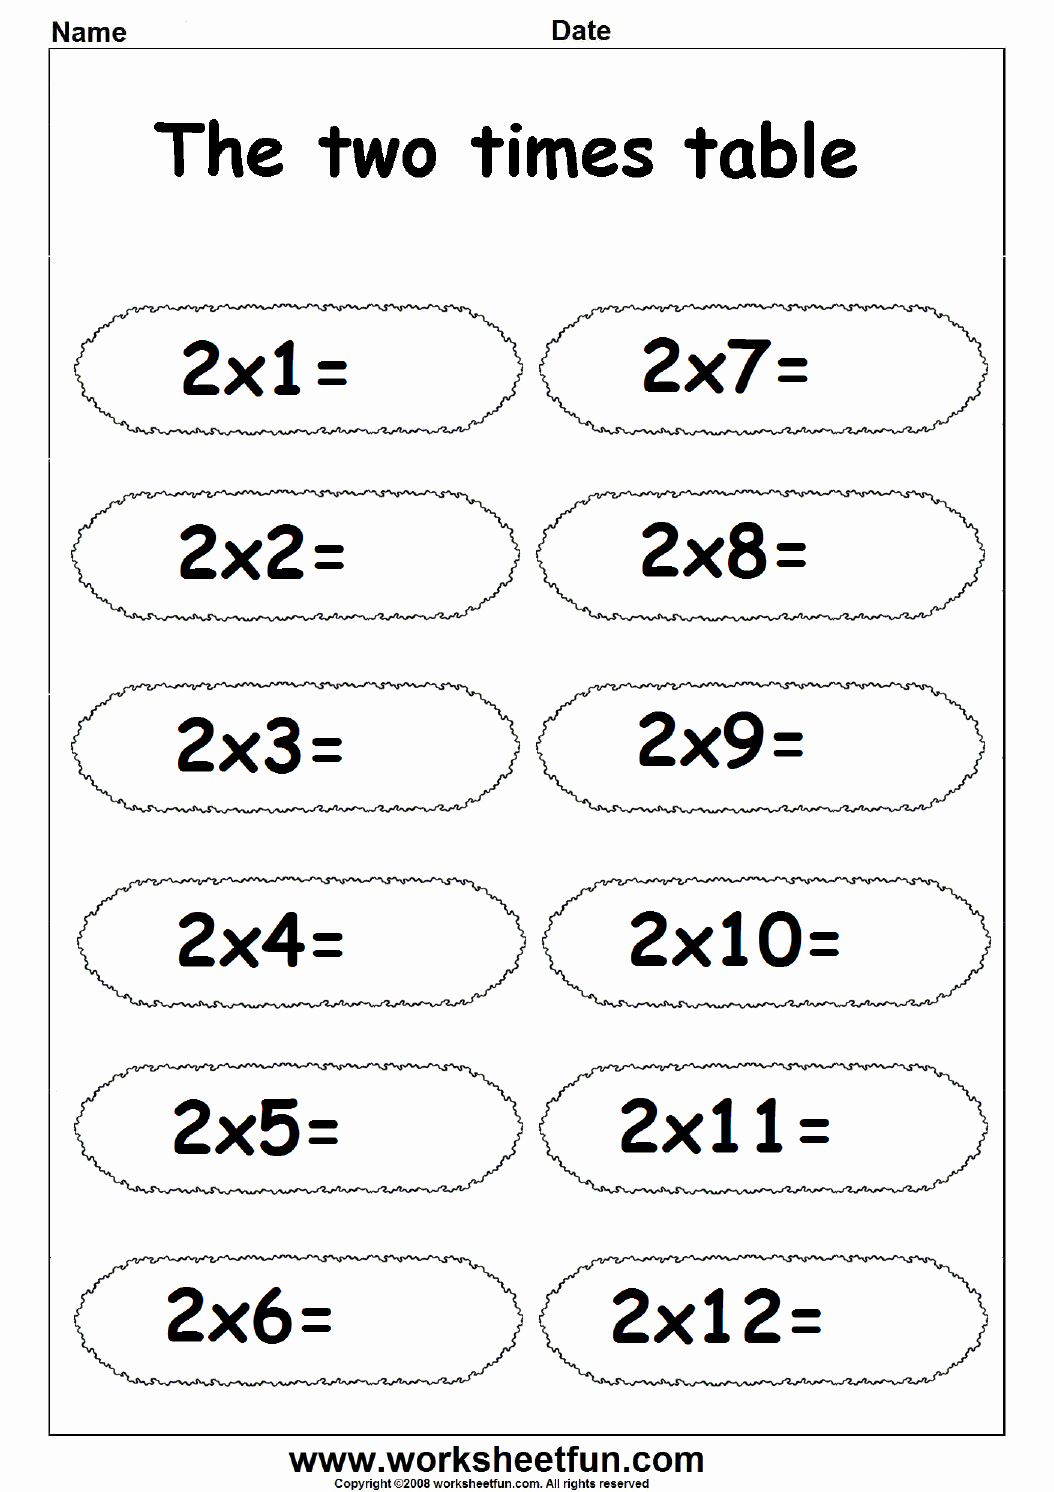 Free Printable Times Tables Worksheets New Times Table Worksheets Printable Worksheets